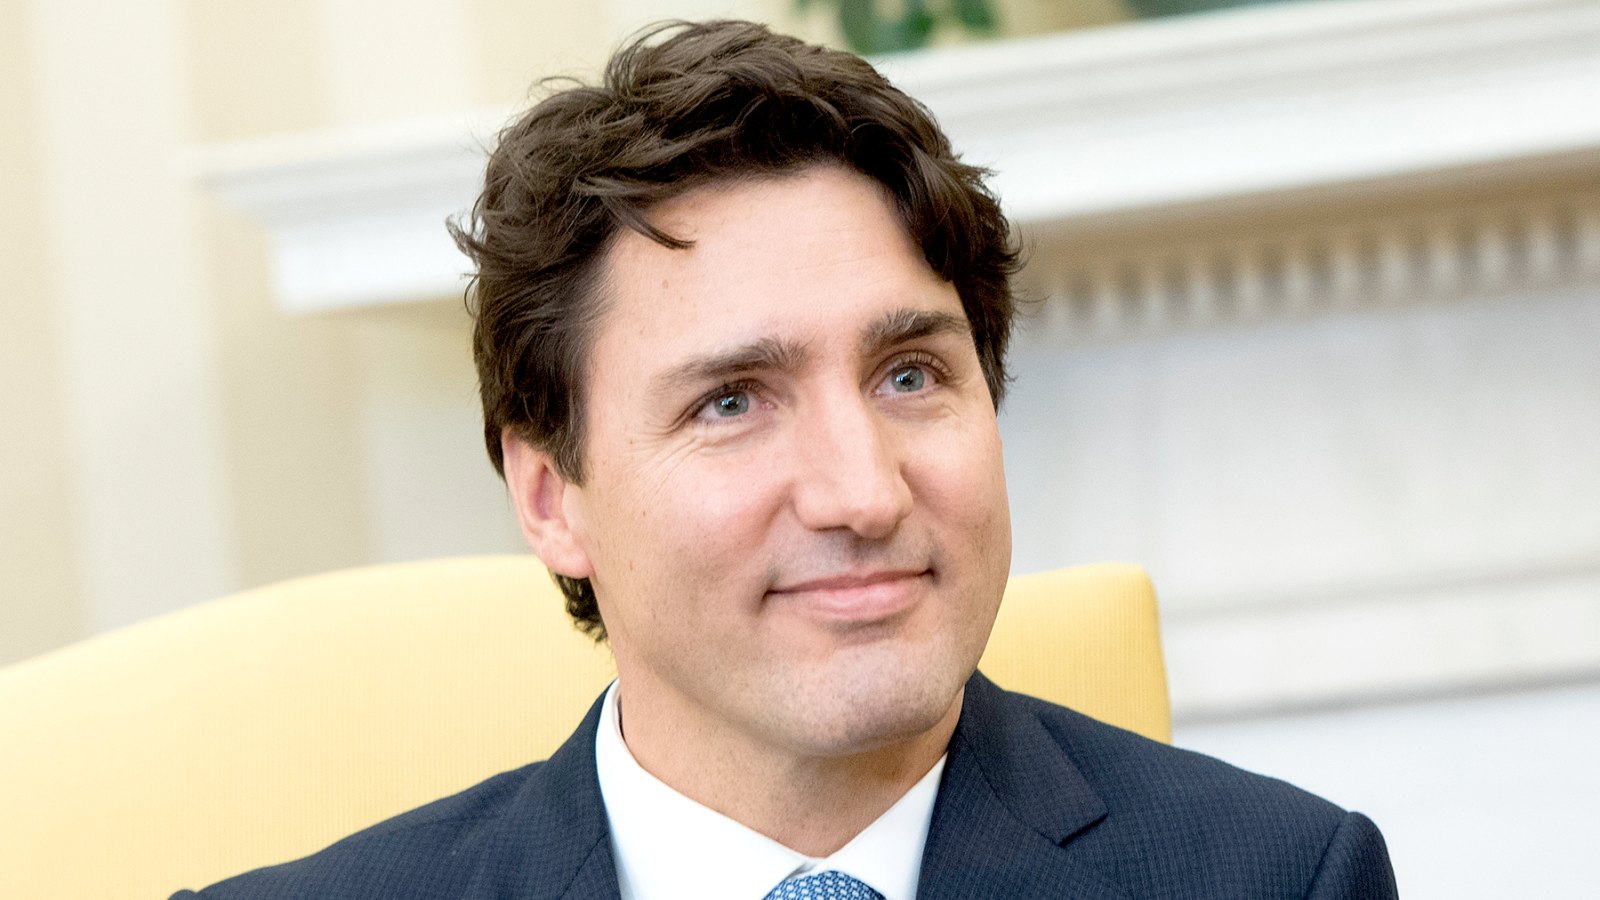 Prime Minister Justin Trudeau of Canada during a meeting with U.S. President Donald Trump (not pictured) in the Oval Office at the White House on February 13, 2017 in Washington, D.C.